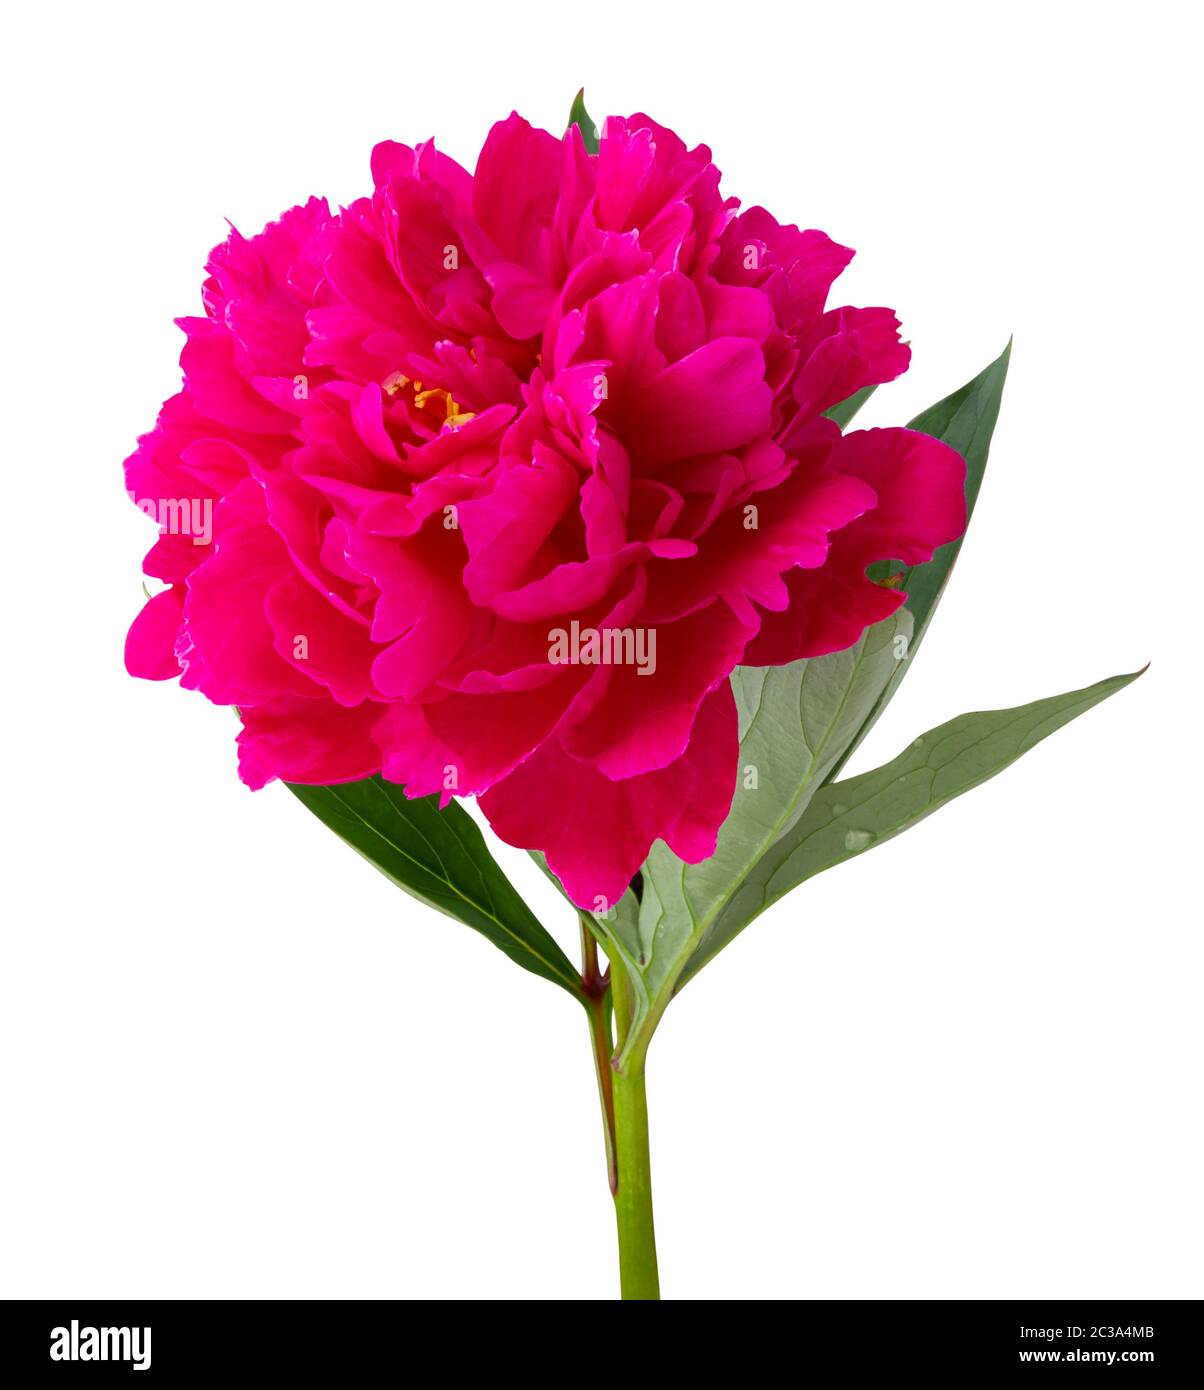 Wonderful Roses (Peony, Paeonia) isolated on white background, including clipping path. Germany Stock Photo